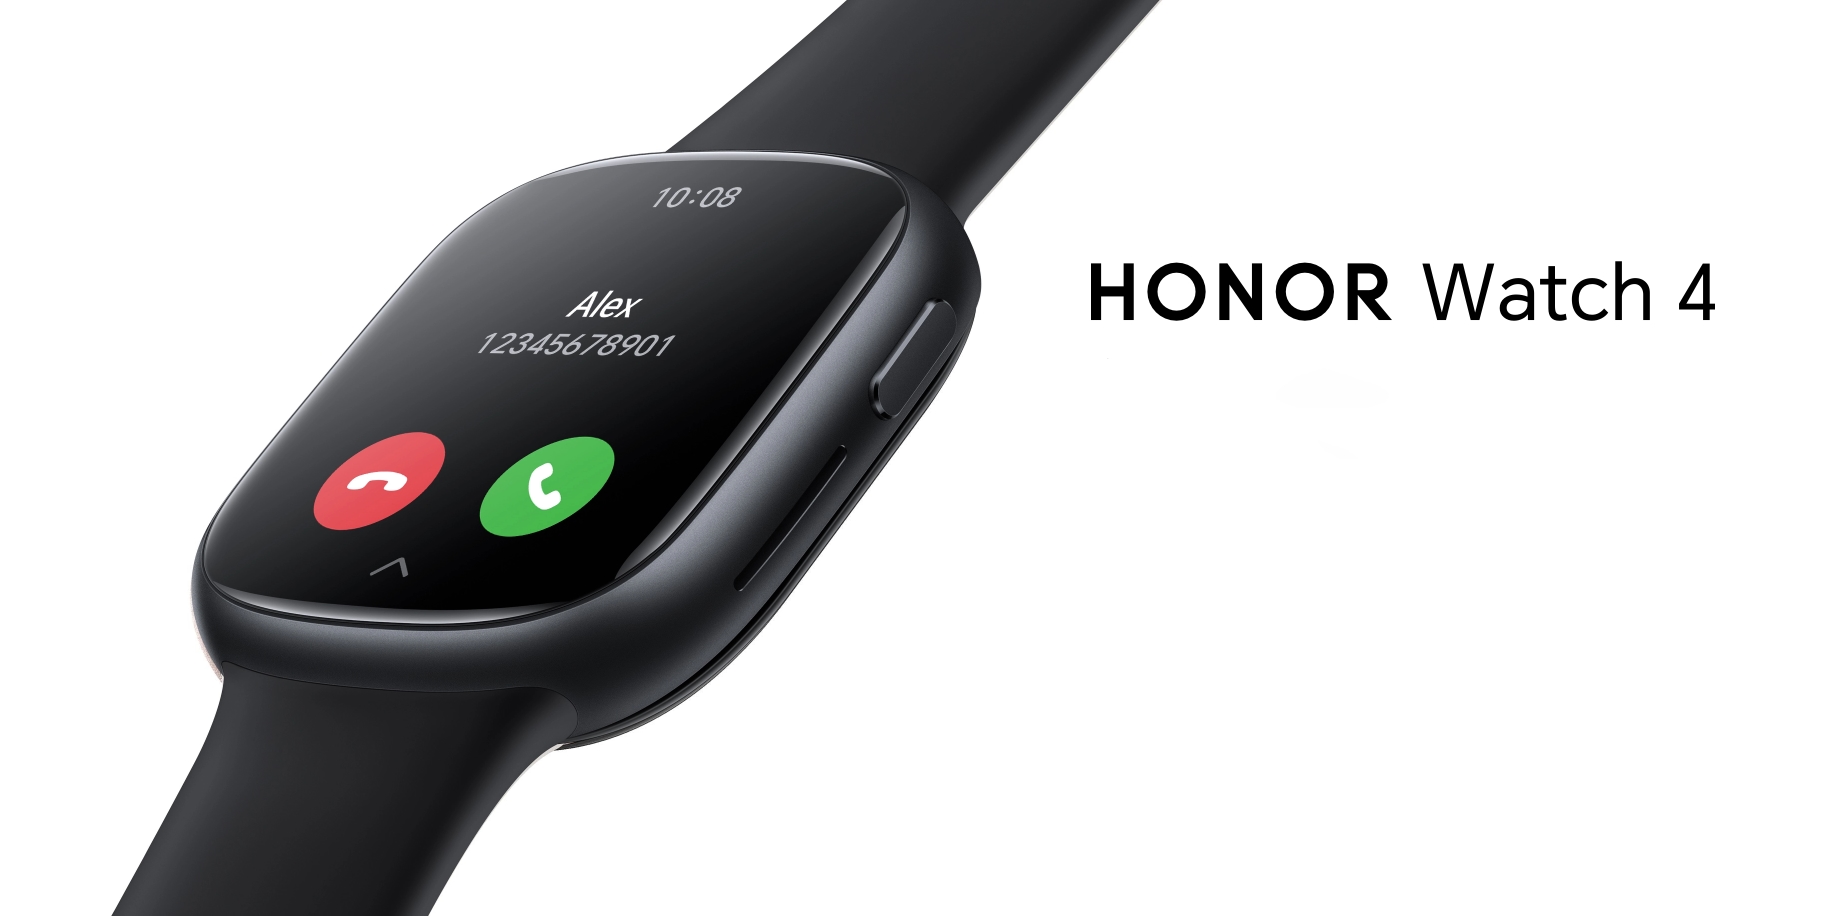 Honor Watch 4 with AMOLED screen, GPS and up to 14 days of battery life debuted in Europe